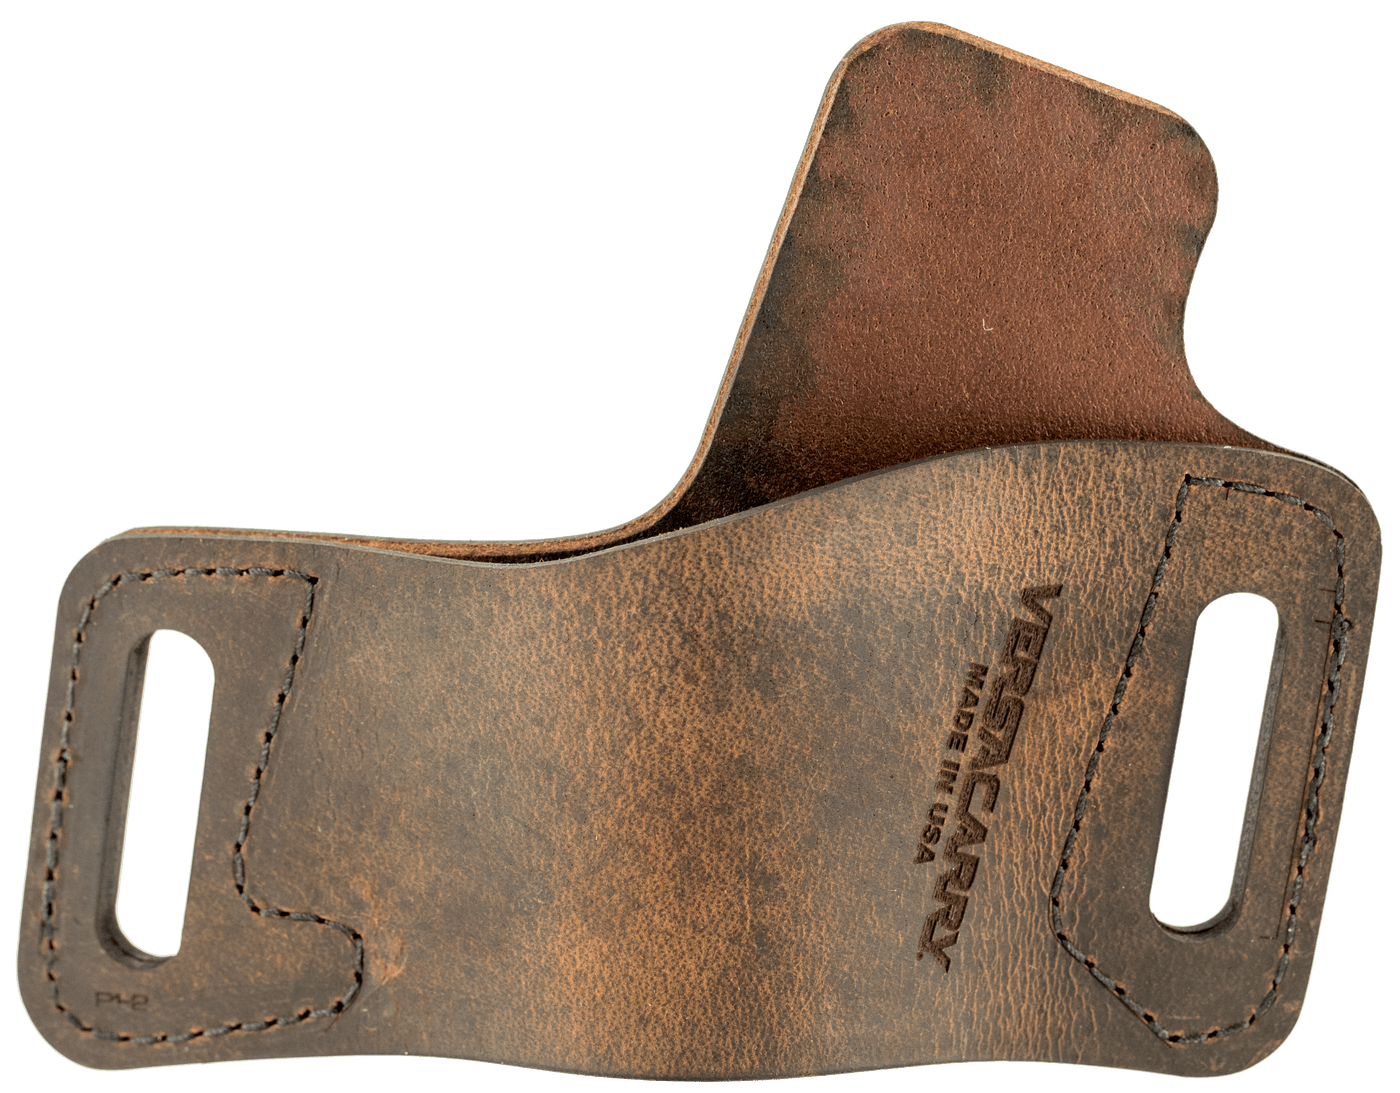 VersaCarry Versacarry Protector S1 Owb Rh - Compact/full Sz1 Brown Holsters And Related Items